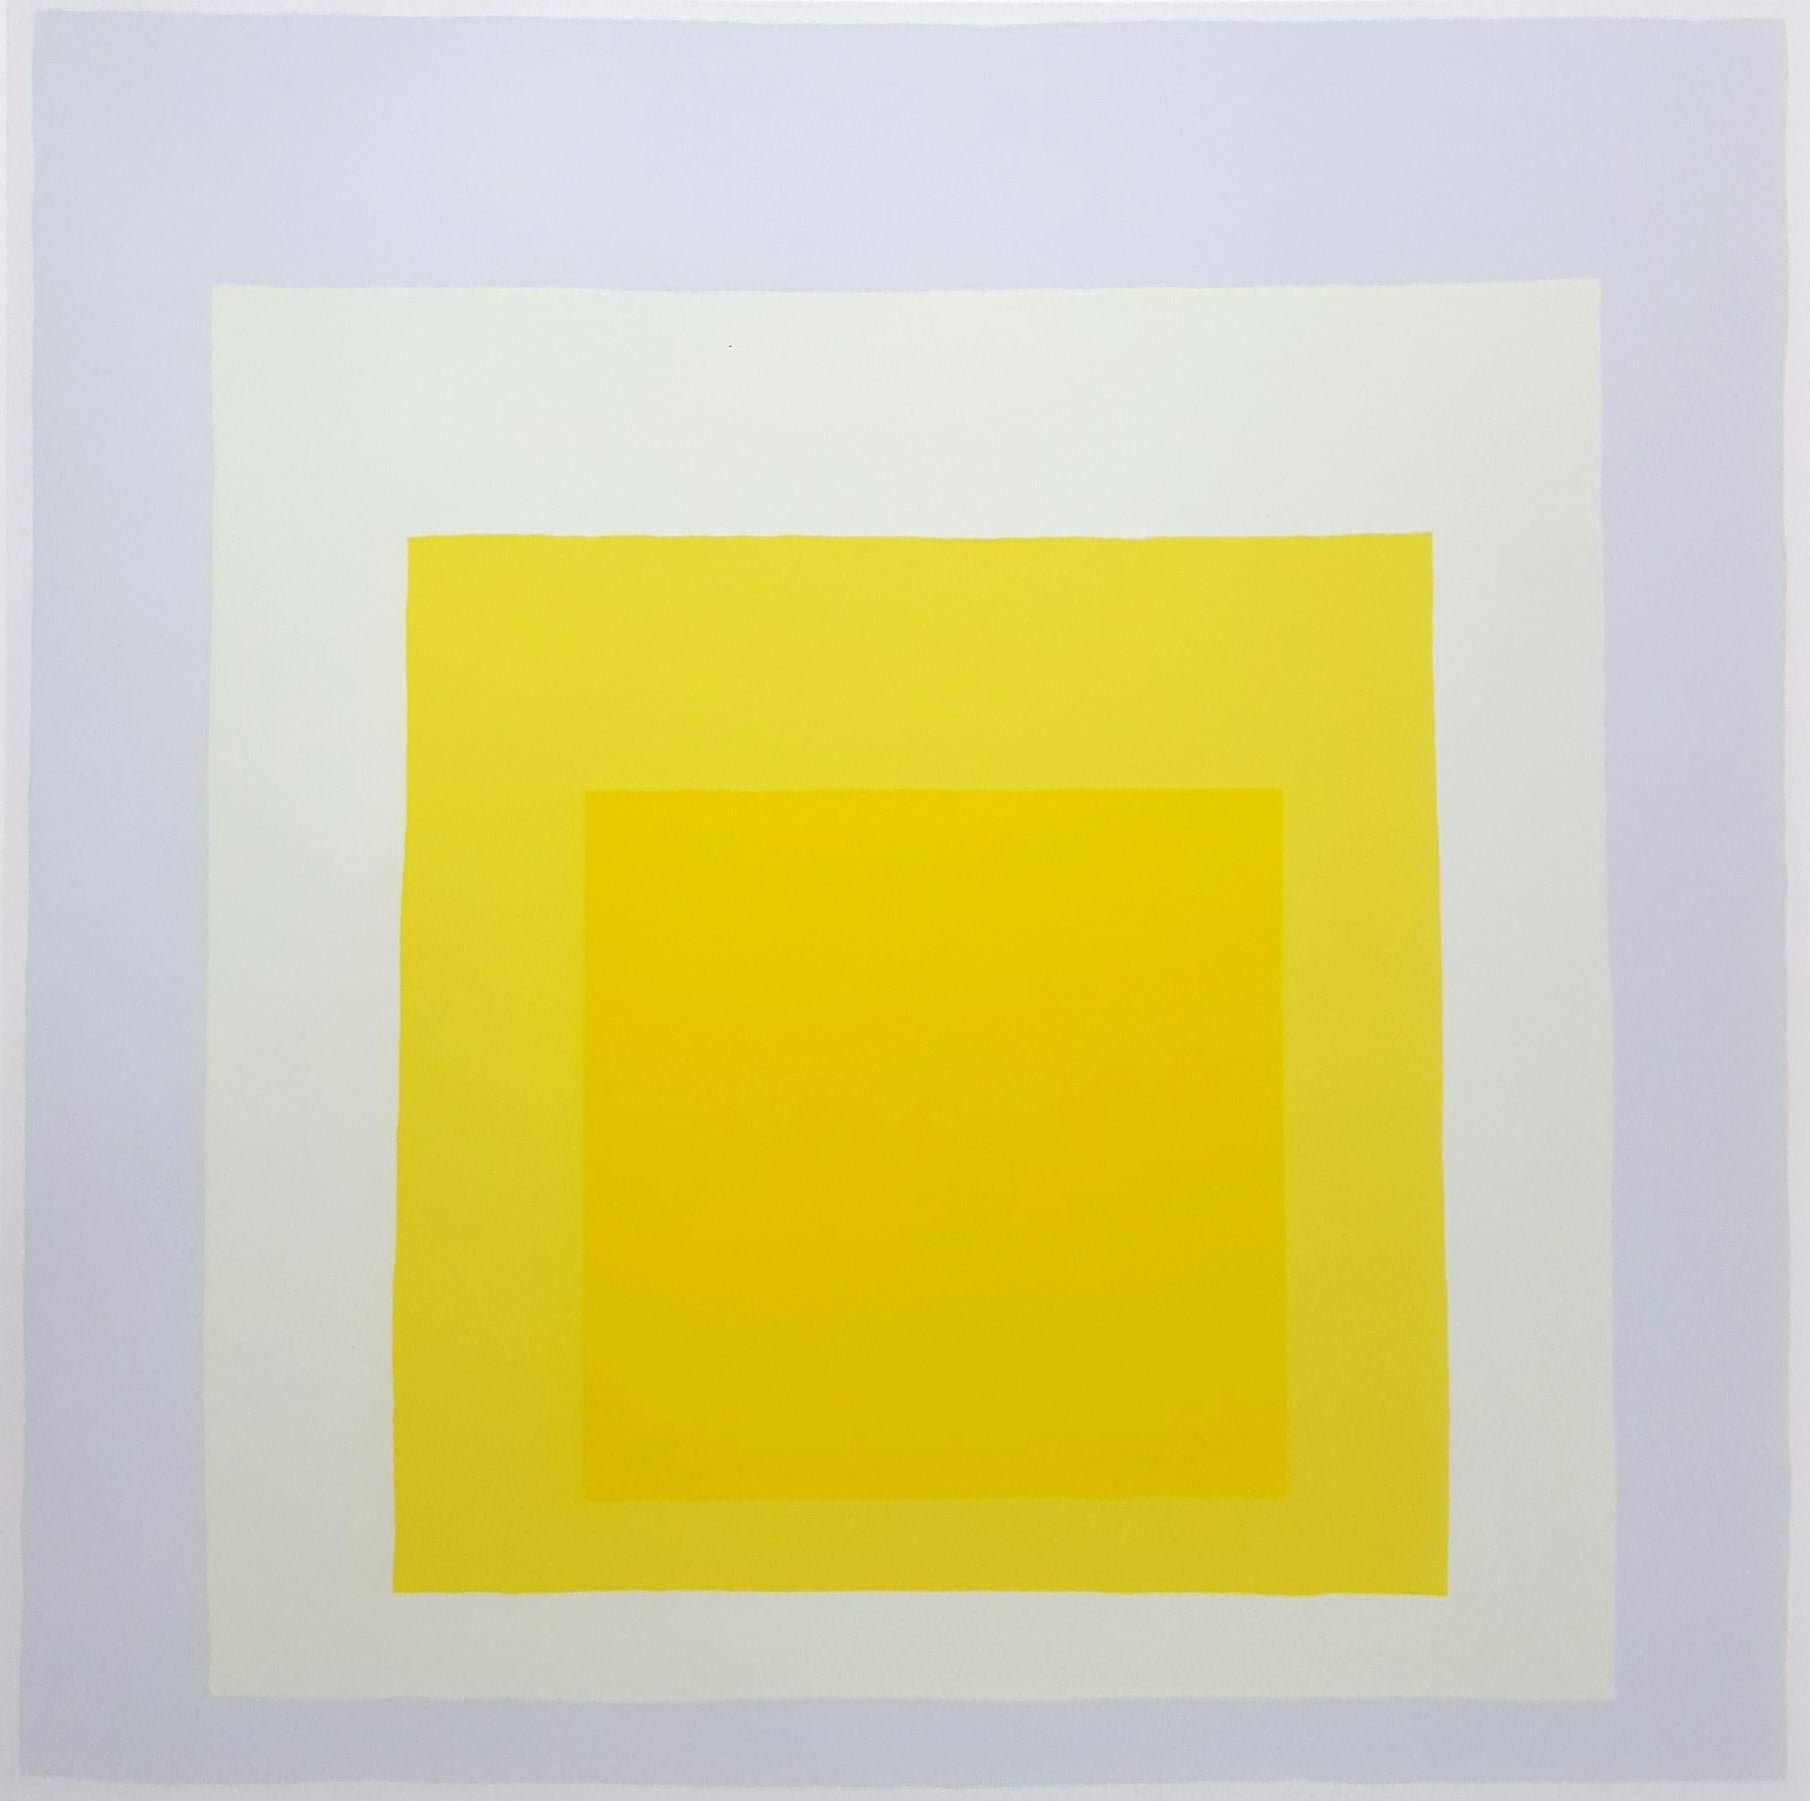 Homage to the Square: Galerie Melki 3 - Minimalist Print by Josef Albers